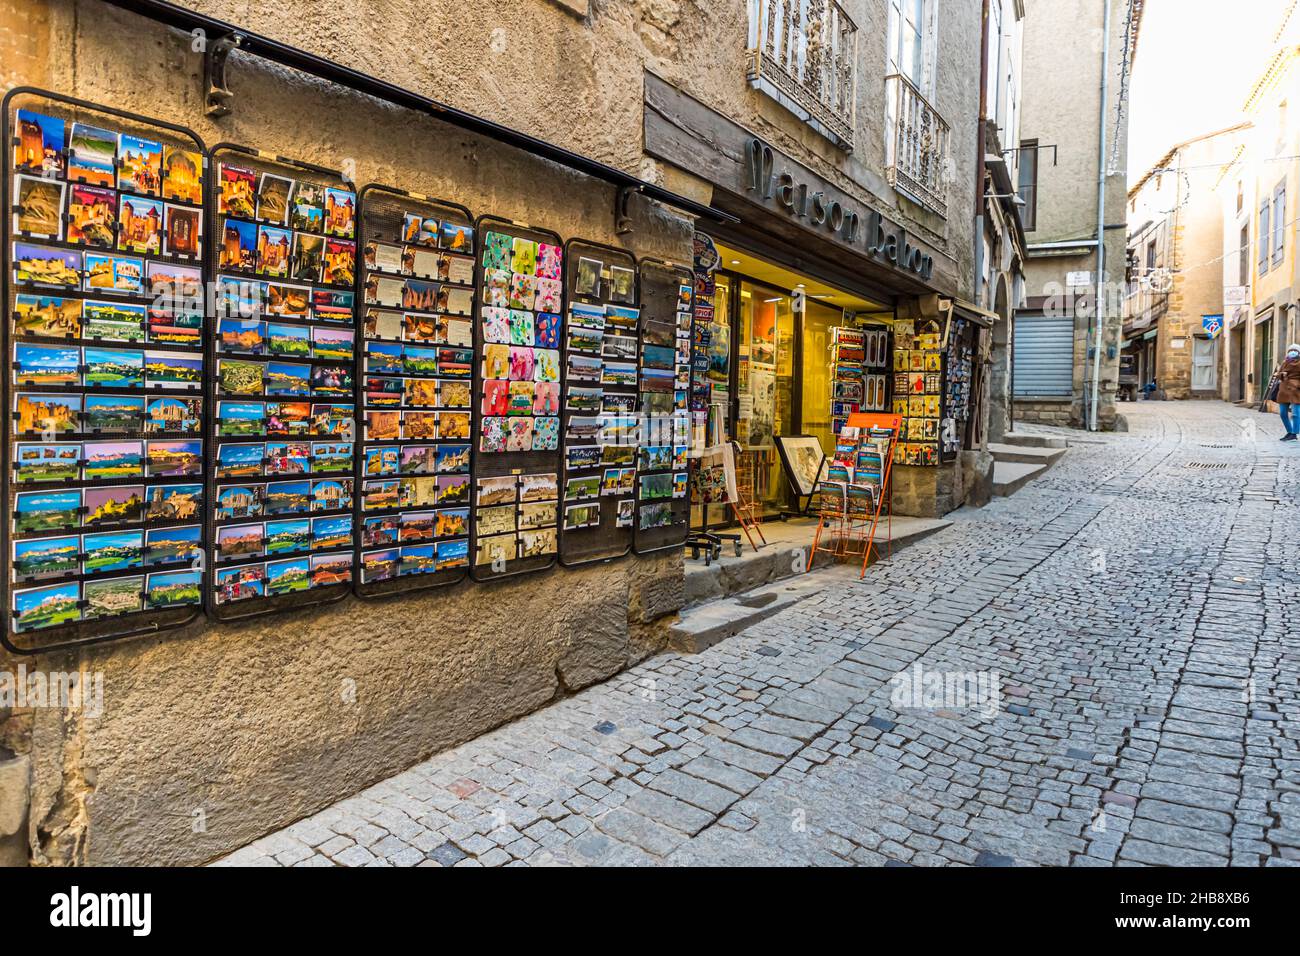 Postcard store of Carcassonne, France Stock Photo